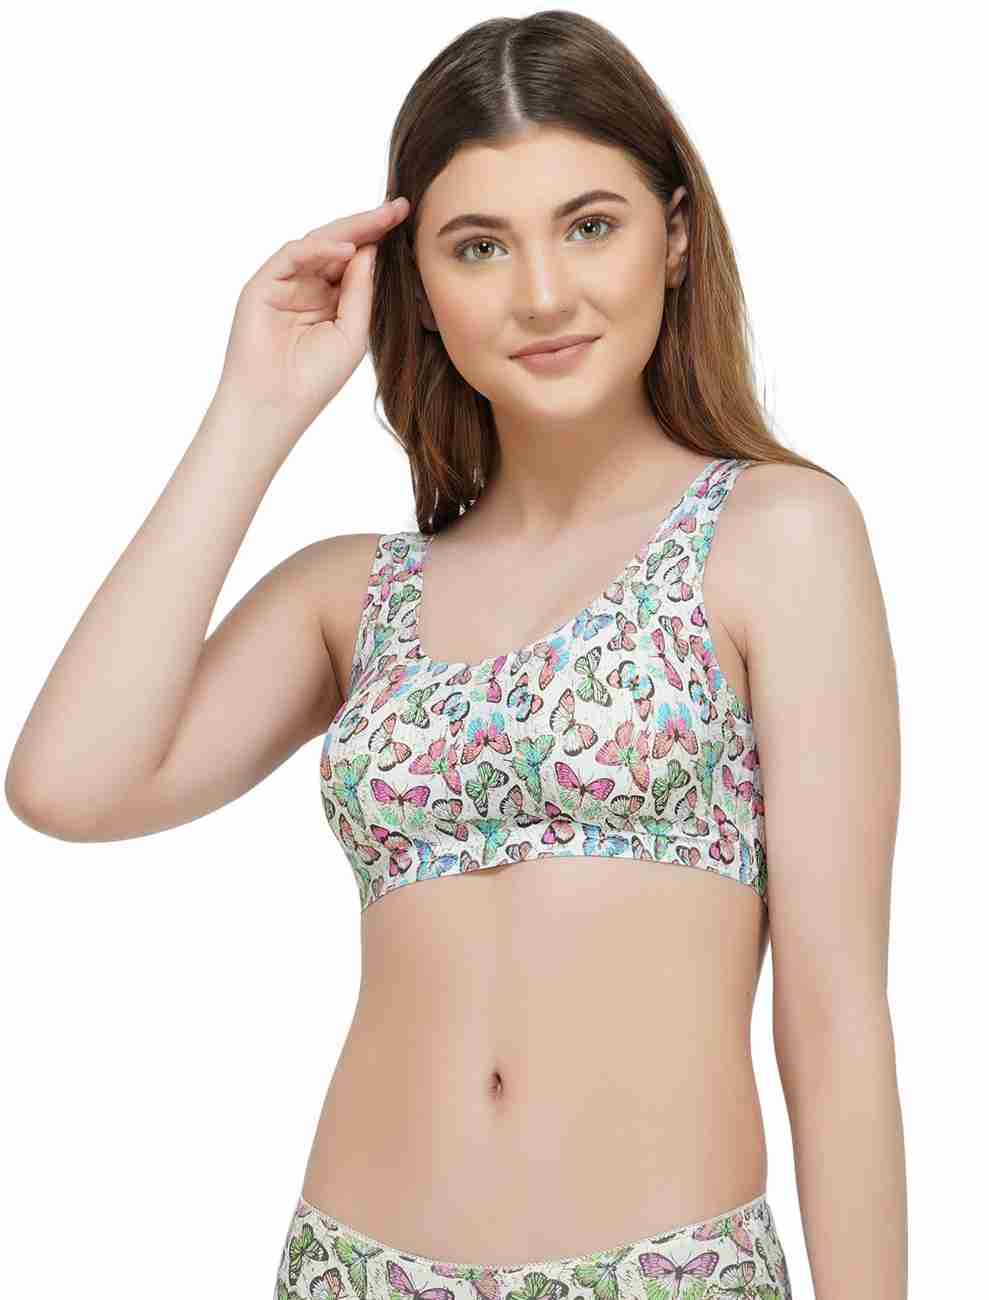 Multicolor Comfortable Soft Cotton Printed Padded Bra And High Cut Panties  Set For Ladies at Best Price in Delhi